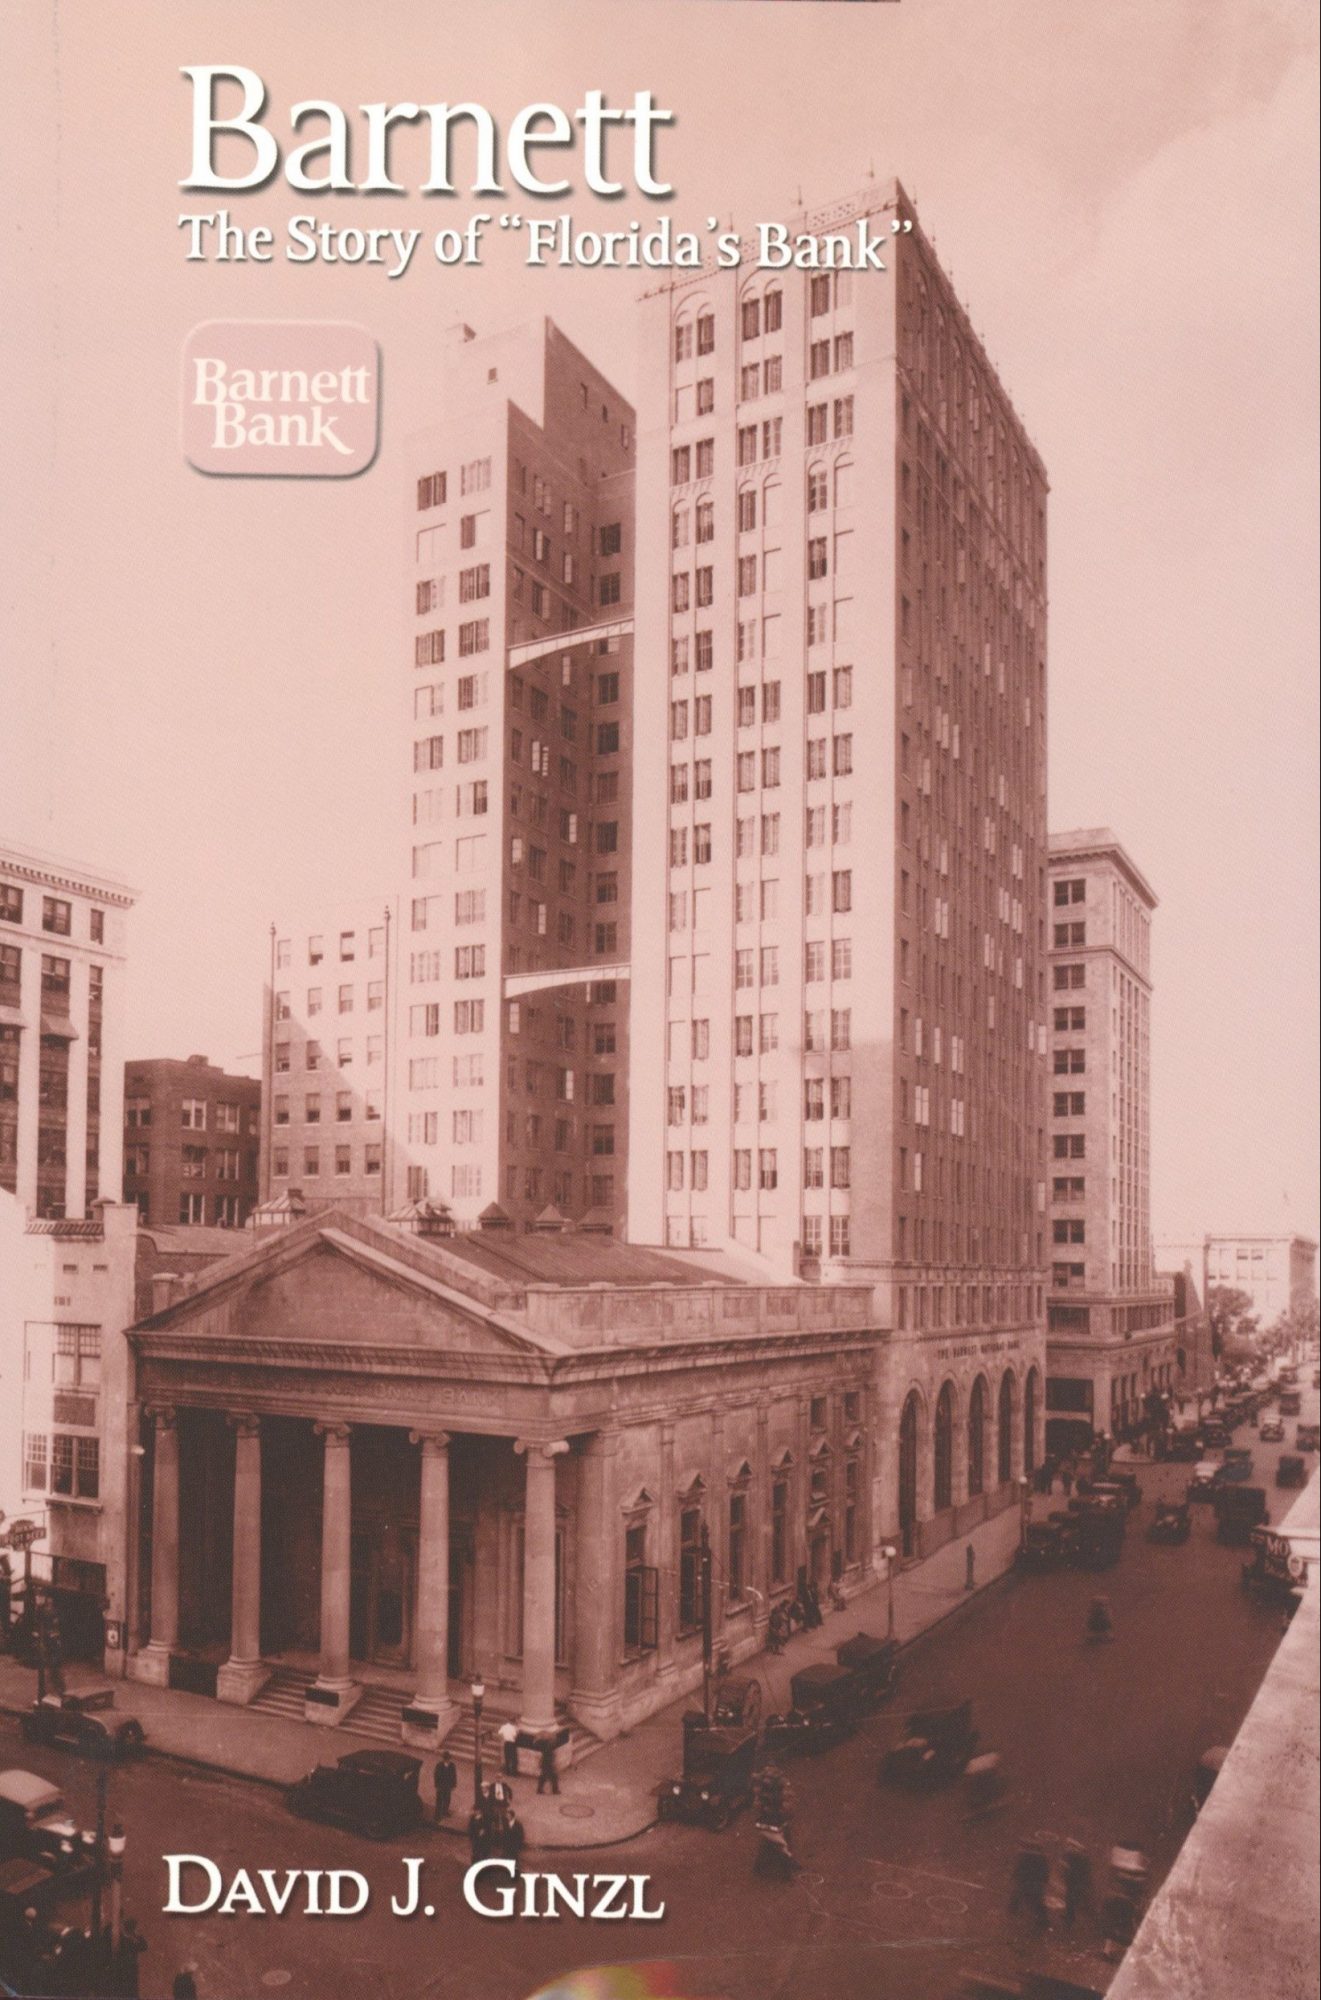 Image of the front cover of Barnett.